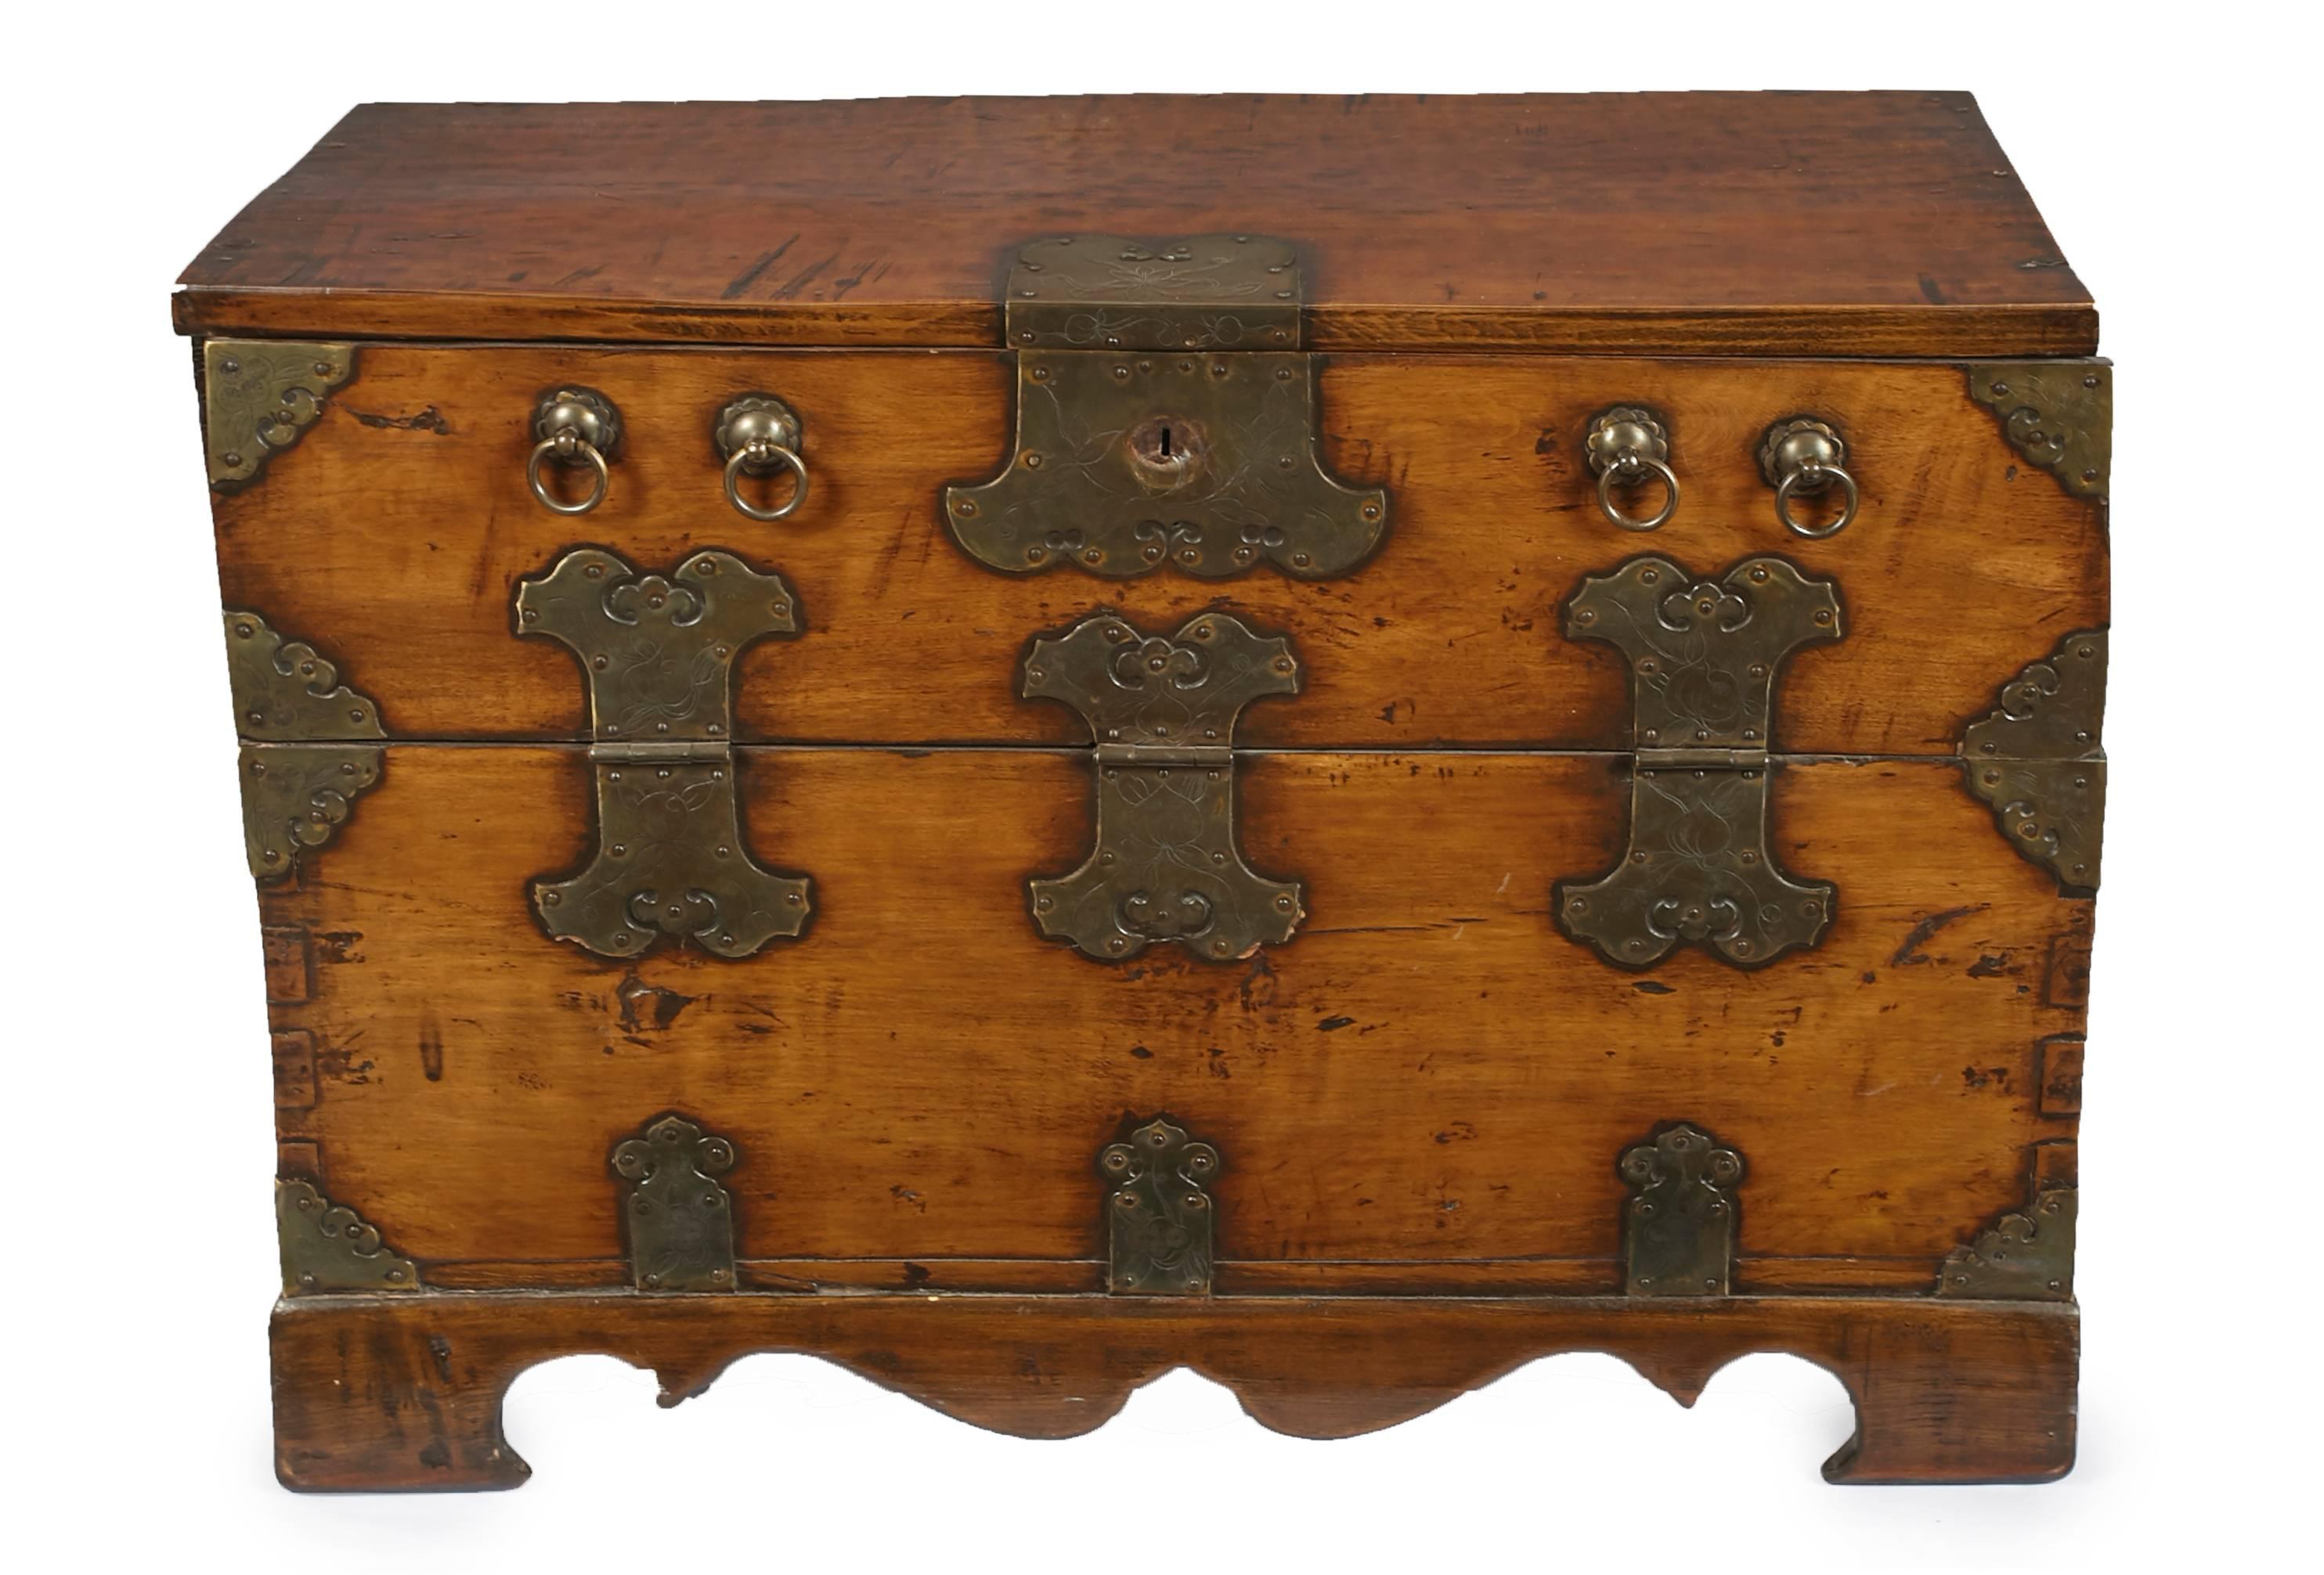 Remarkable chest from the mid-late 19th century. Hand hewn with brass details.